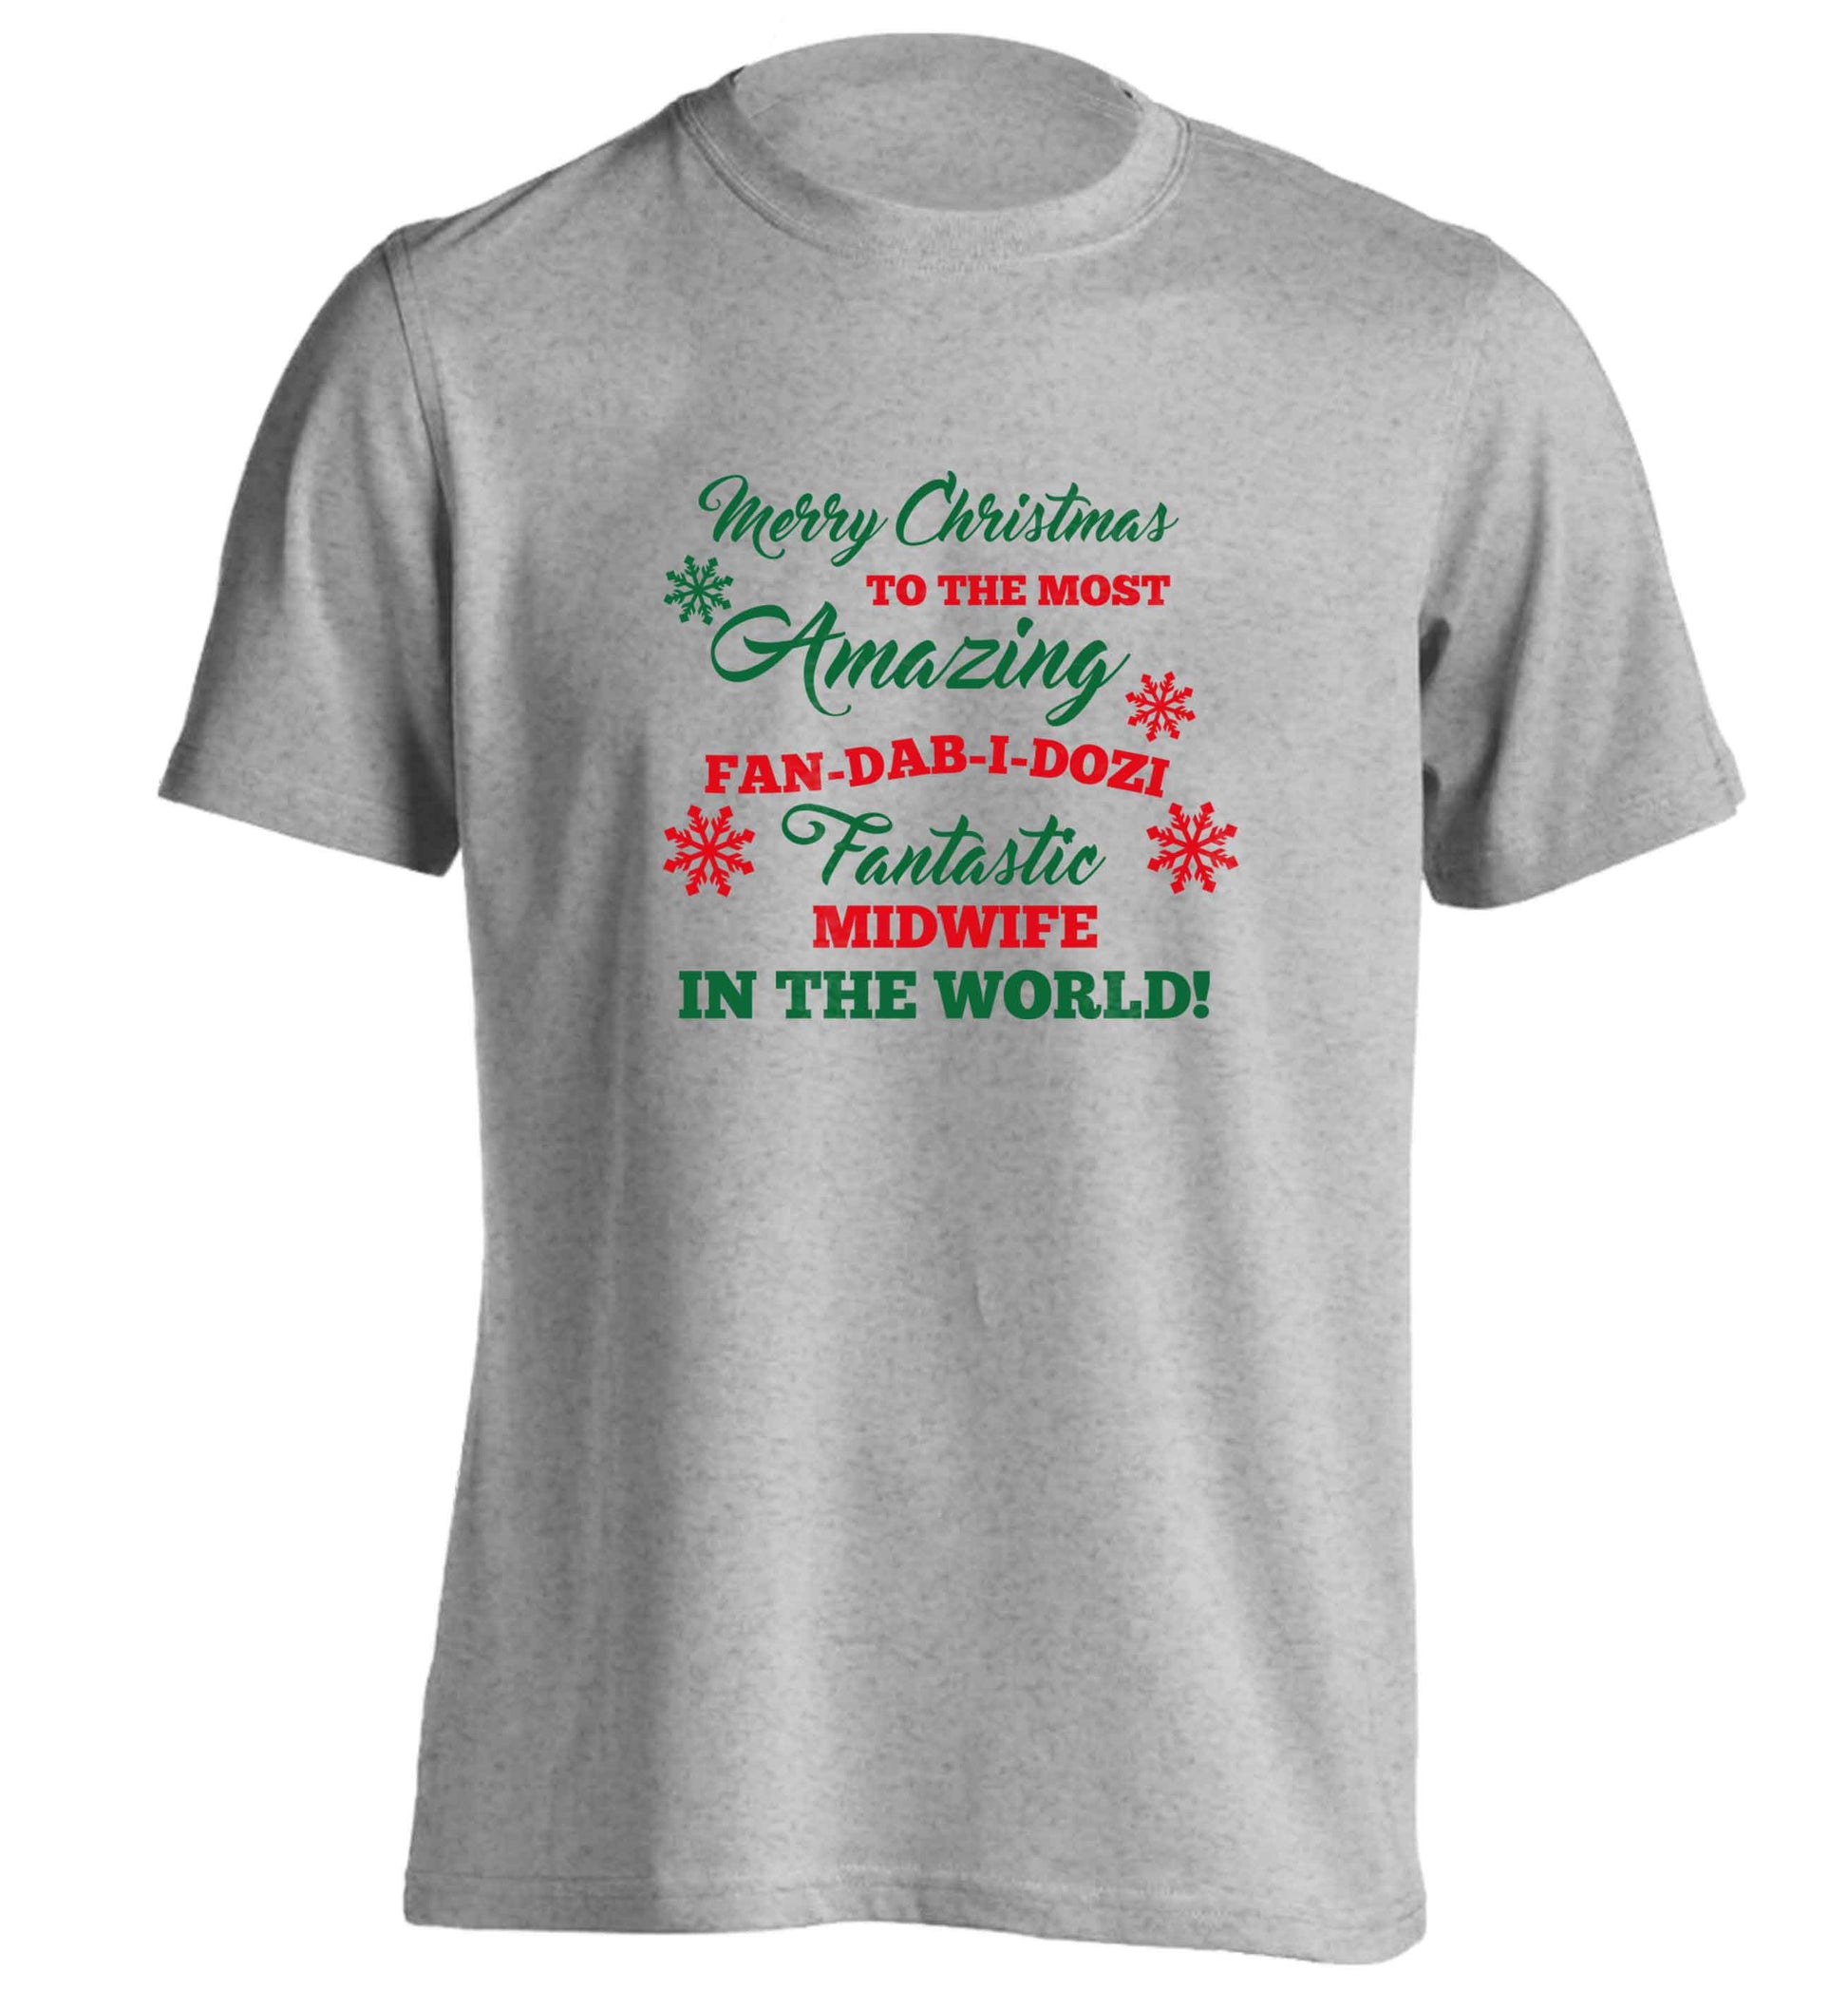 Merry Christmas to the most amazing midwife in the world! adults unisex grey Tshirt 2XL